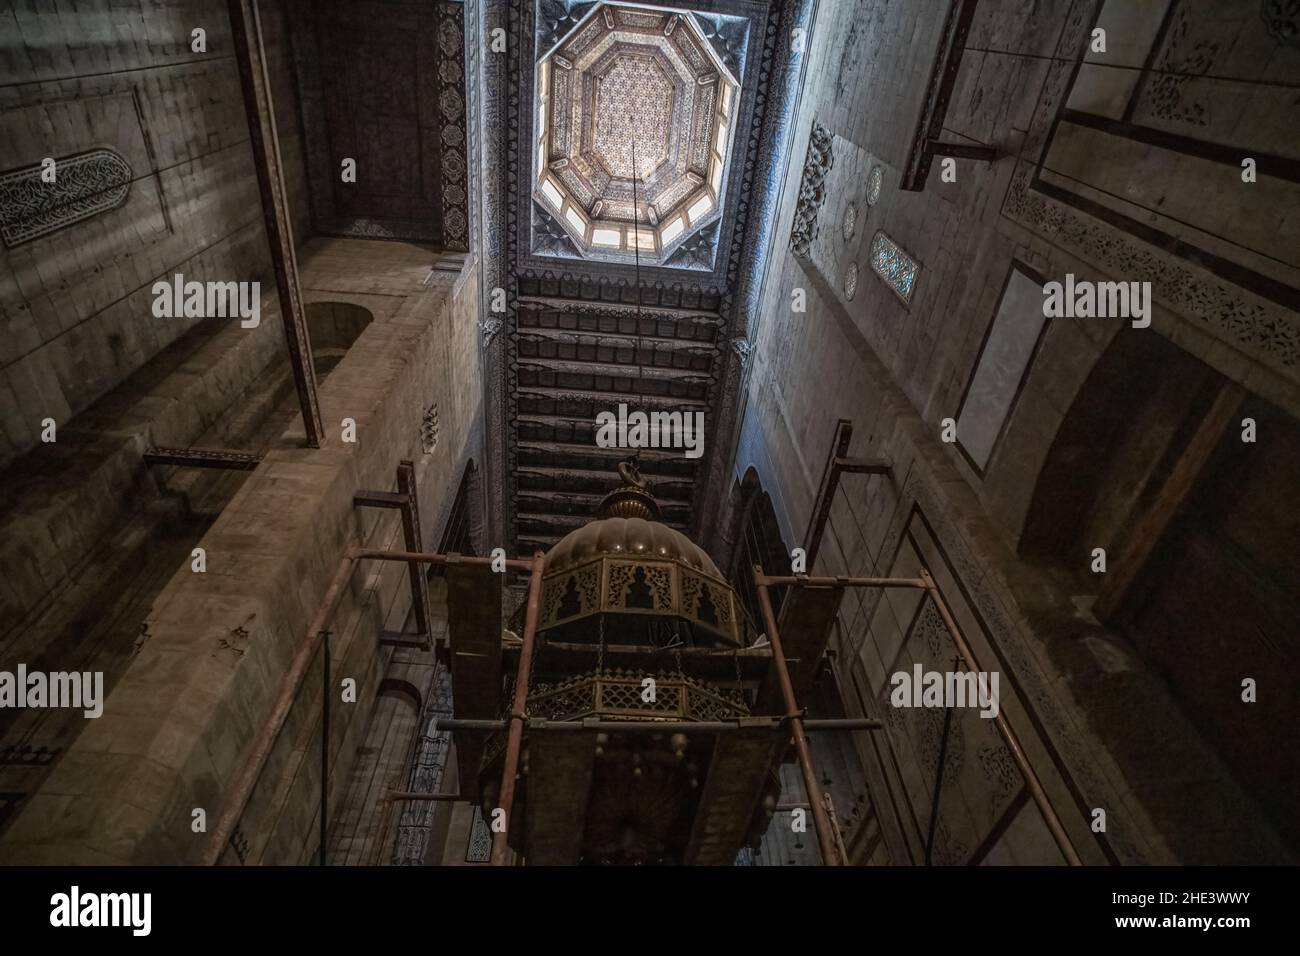 The tall ceiling dome and hanging chandelier in Mosque al Rifai in Cairo, Egypt. Stock Photo